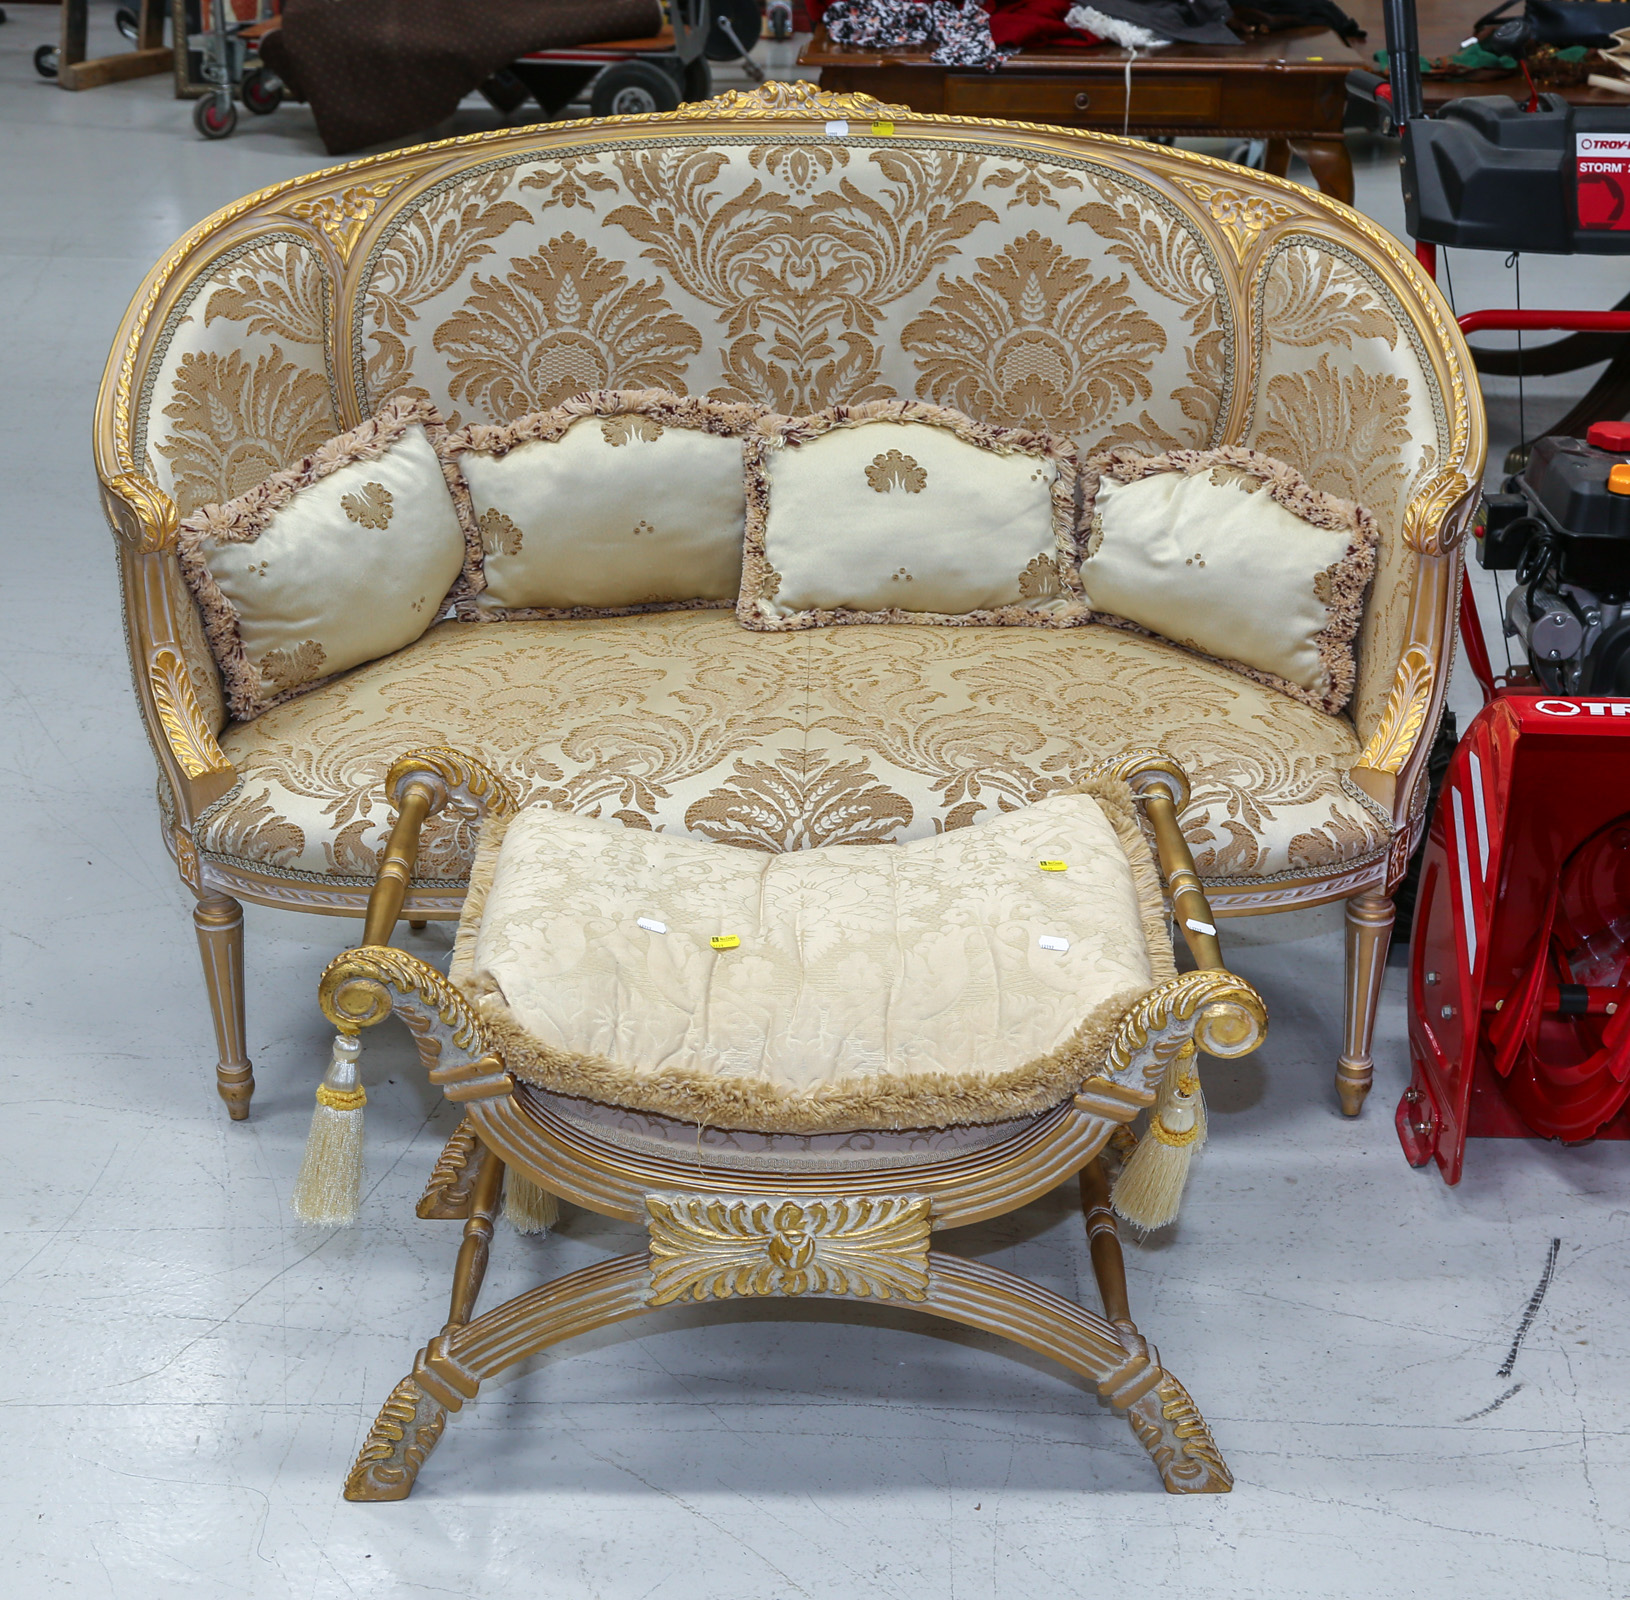 A LOUIS XV STYLE LOVE SEAT NEOCLASSICAL 3cb271